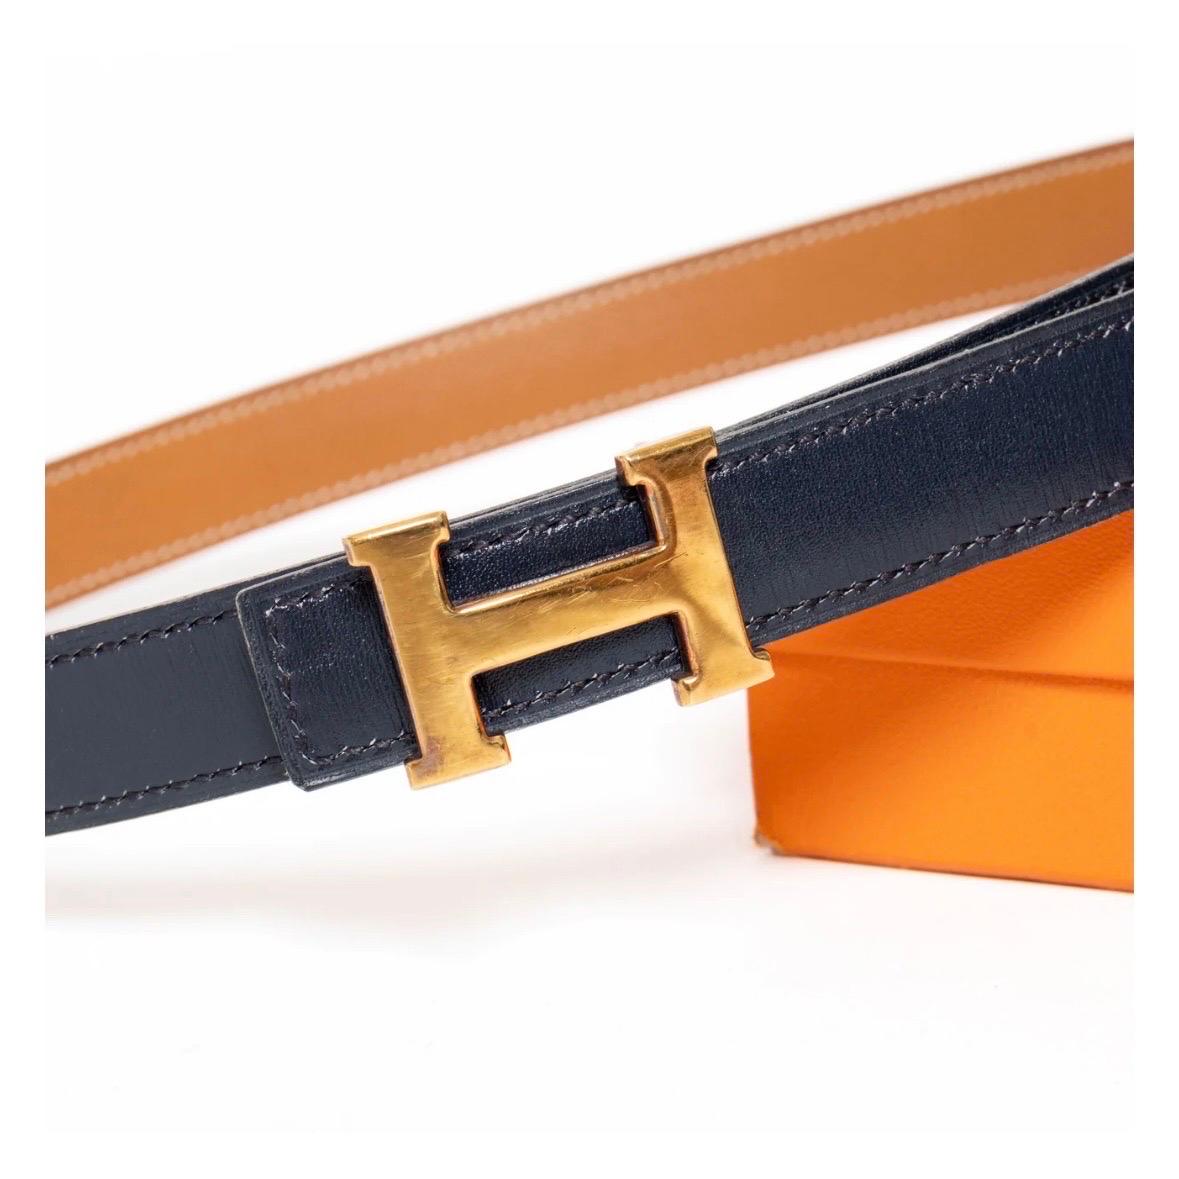 Vintage H Belt Trio by Hermès
Includes Navy, Tan, White
Reversible and interchangeable
Gold-tone hardware
H belt buckle 
Made in France
Condition: good; buckle slightly tarnished and scratched. Minor cracking on holes of Navy and Tan belts. White